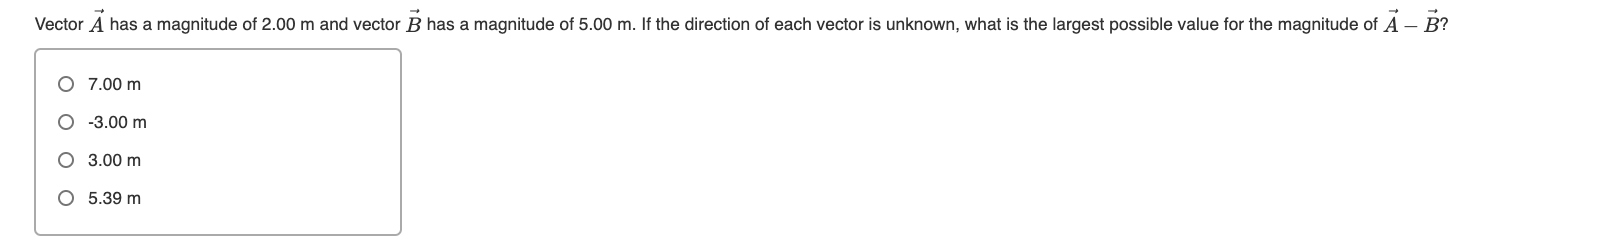 Vector A has a magnitude of 2.00 m and vector B has a magnitude of 5.00 m. If the direction of each vector is unknown, what is the largest possible value for the magnitude of A – B?
O 7.00 m
O -3.00 m
O 3.00 m
O 5.39 m
